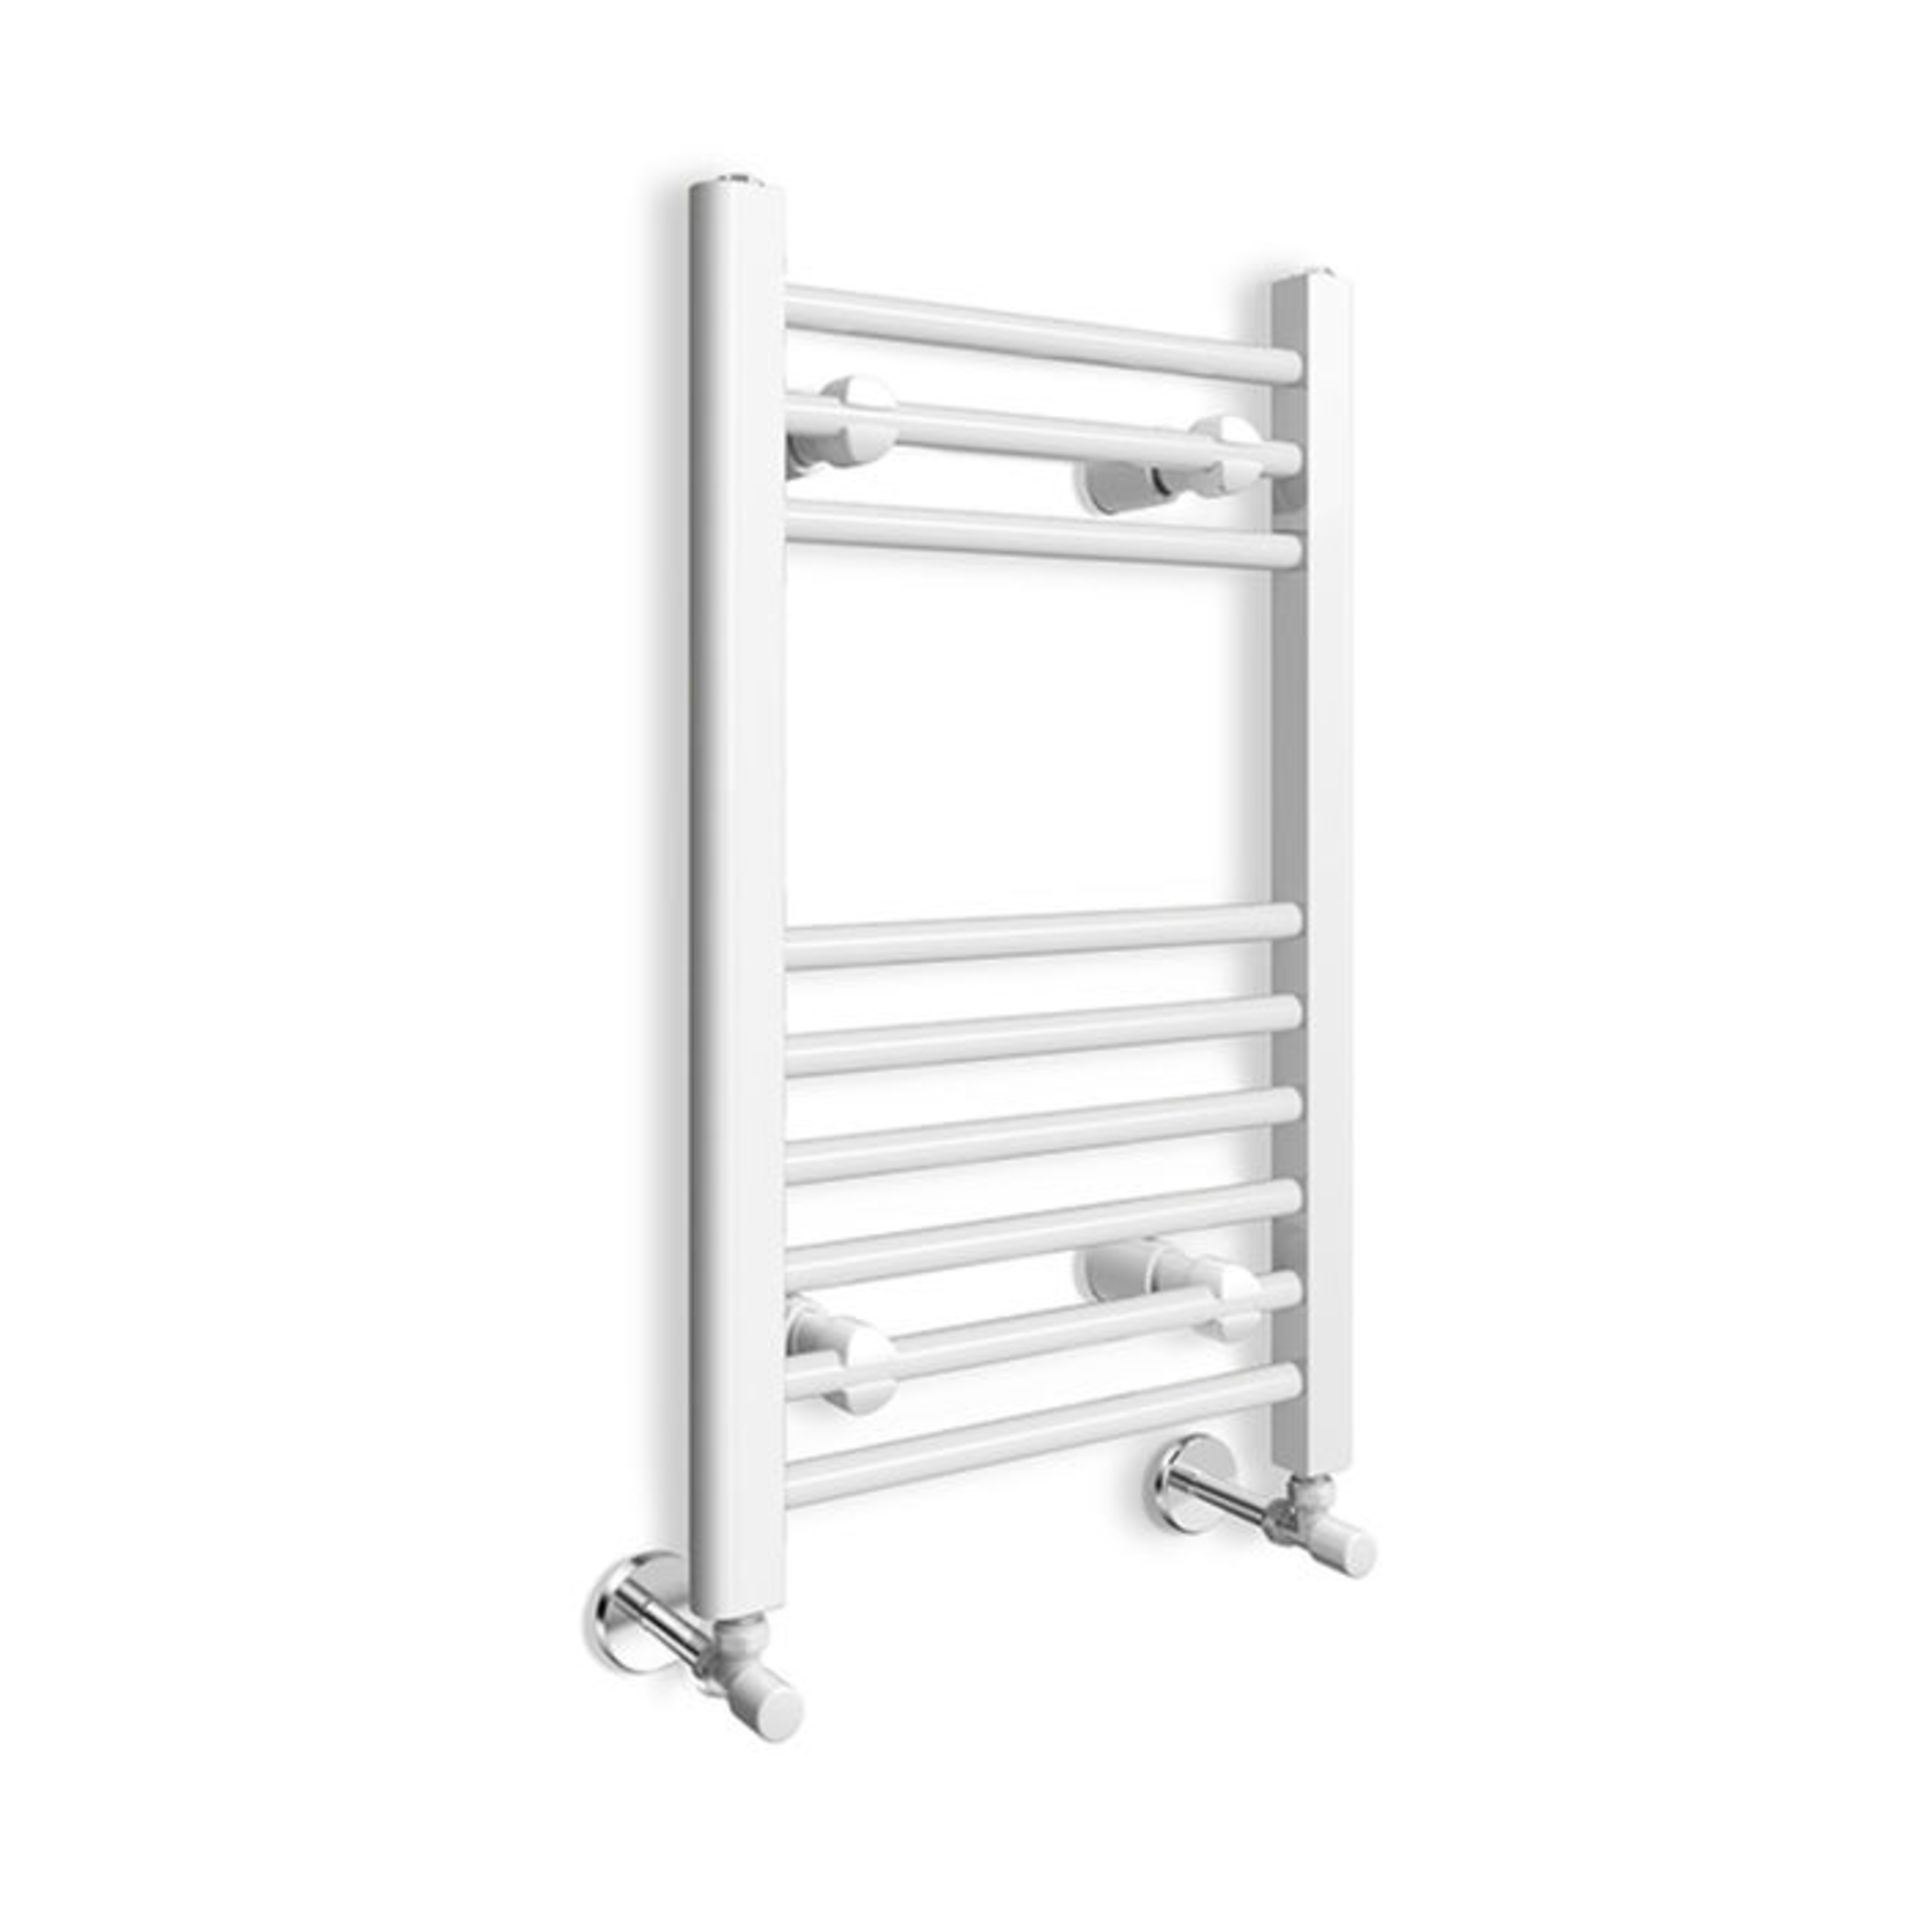 (SA89) 650x400mm White Heated Towel Radiator. Made from low carbon steel Finished with a high